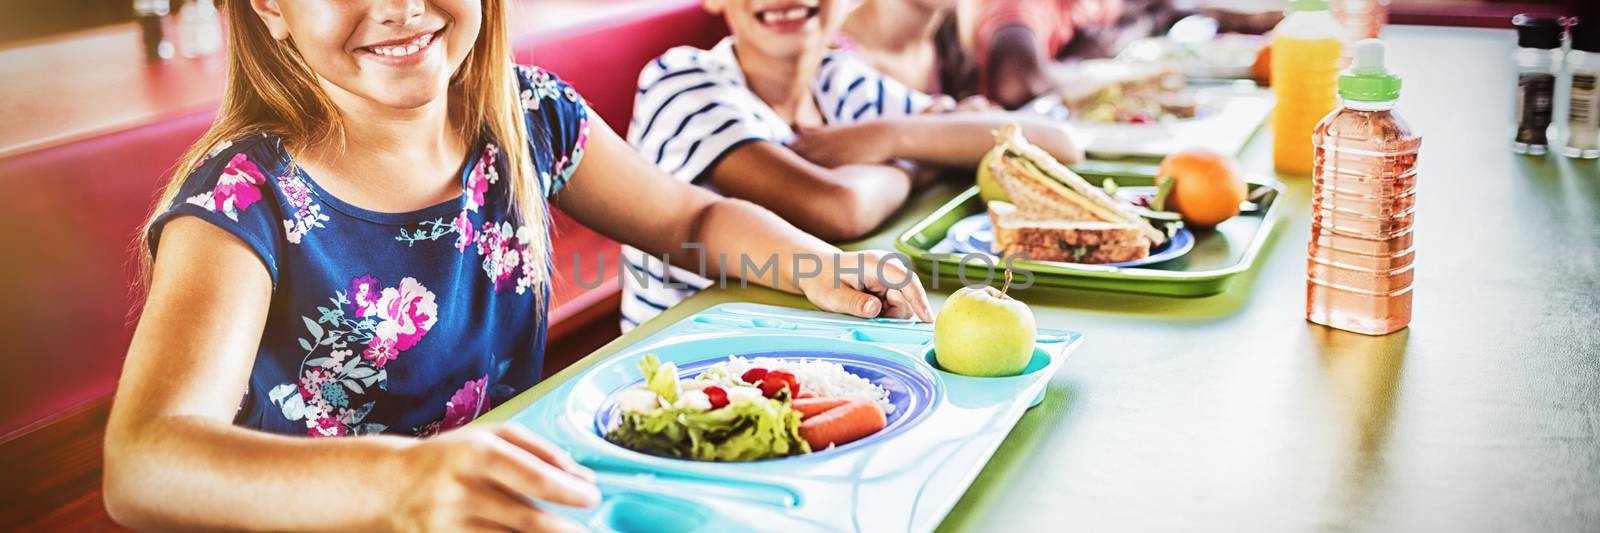 Children eating at the canteen  by Wavebreakmedia